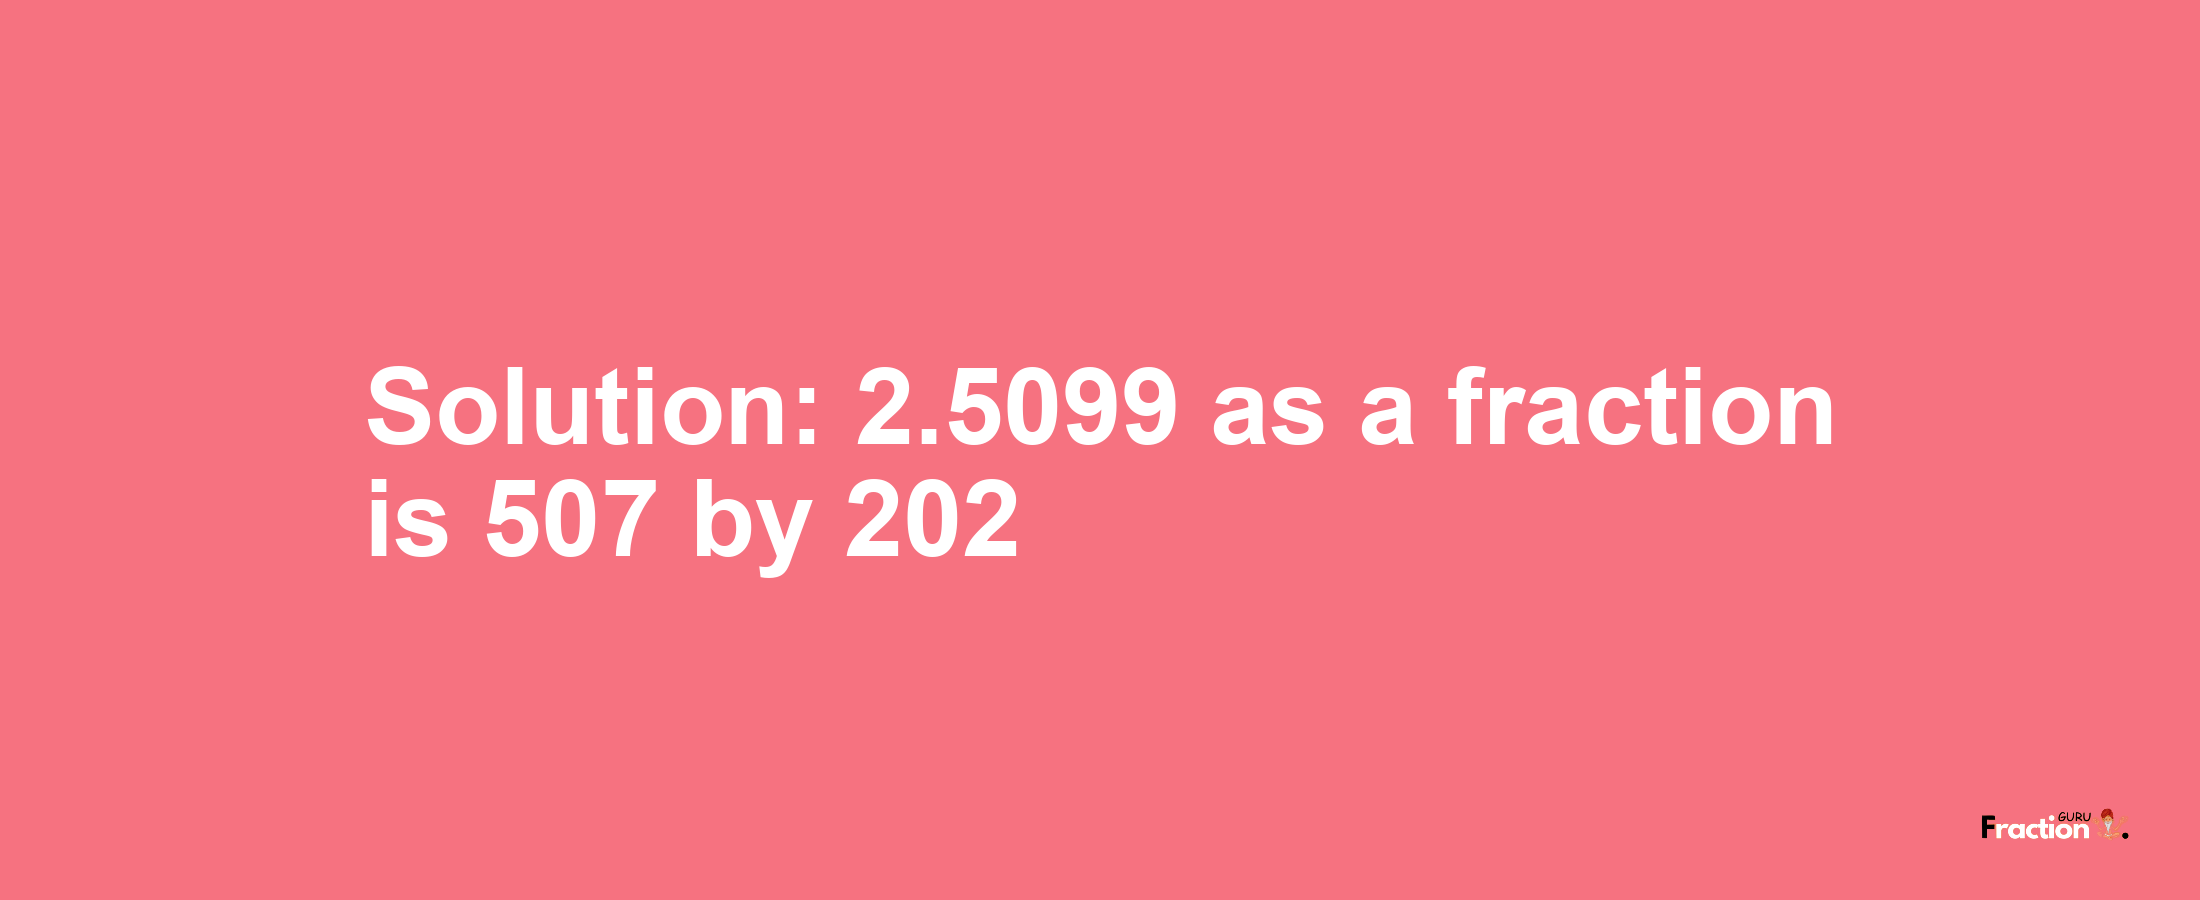 Solution:2.5099 as a fraction is 507/202